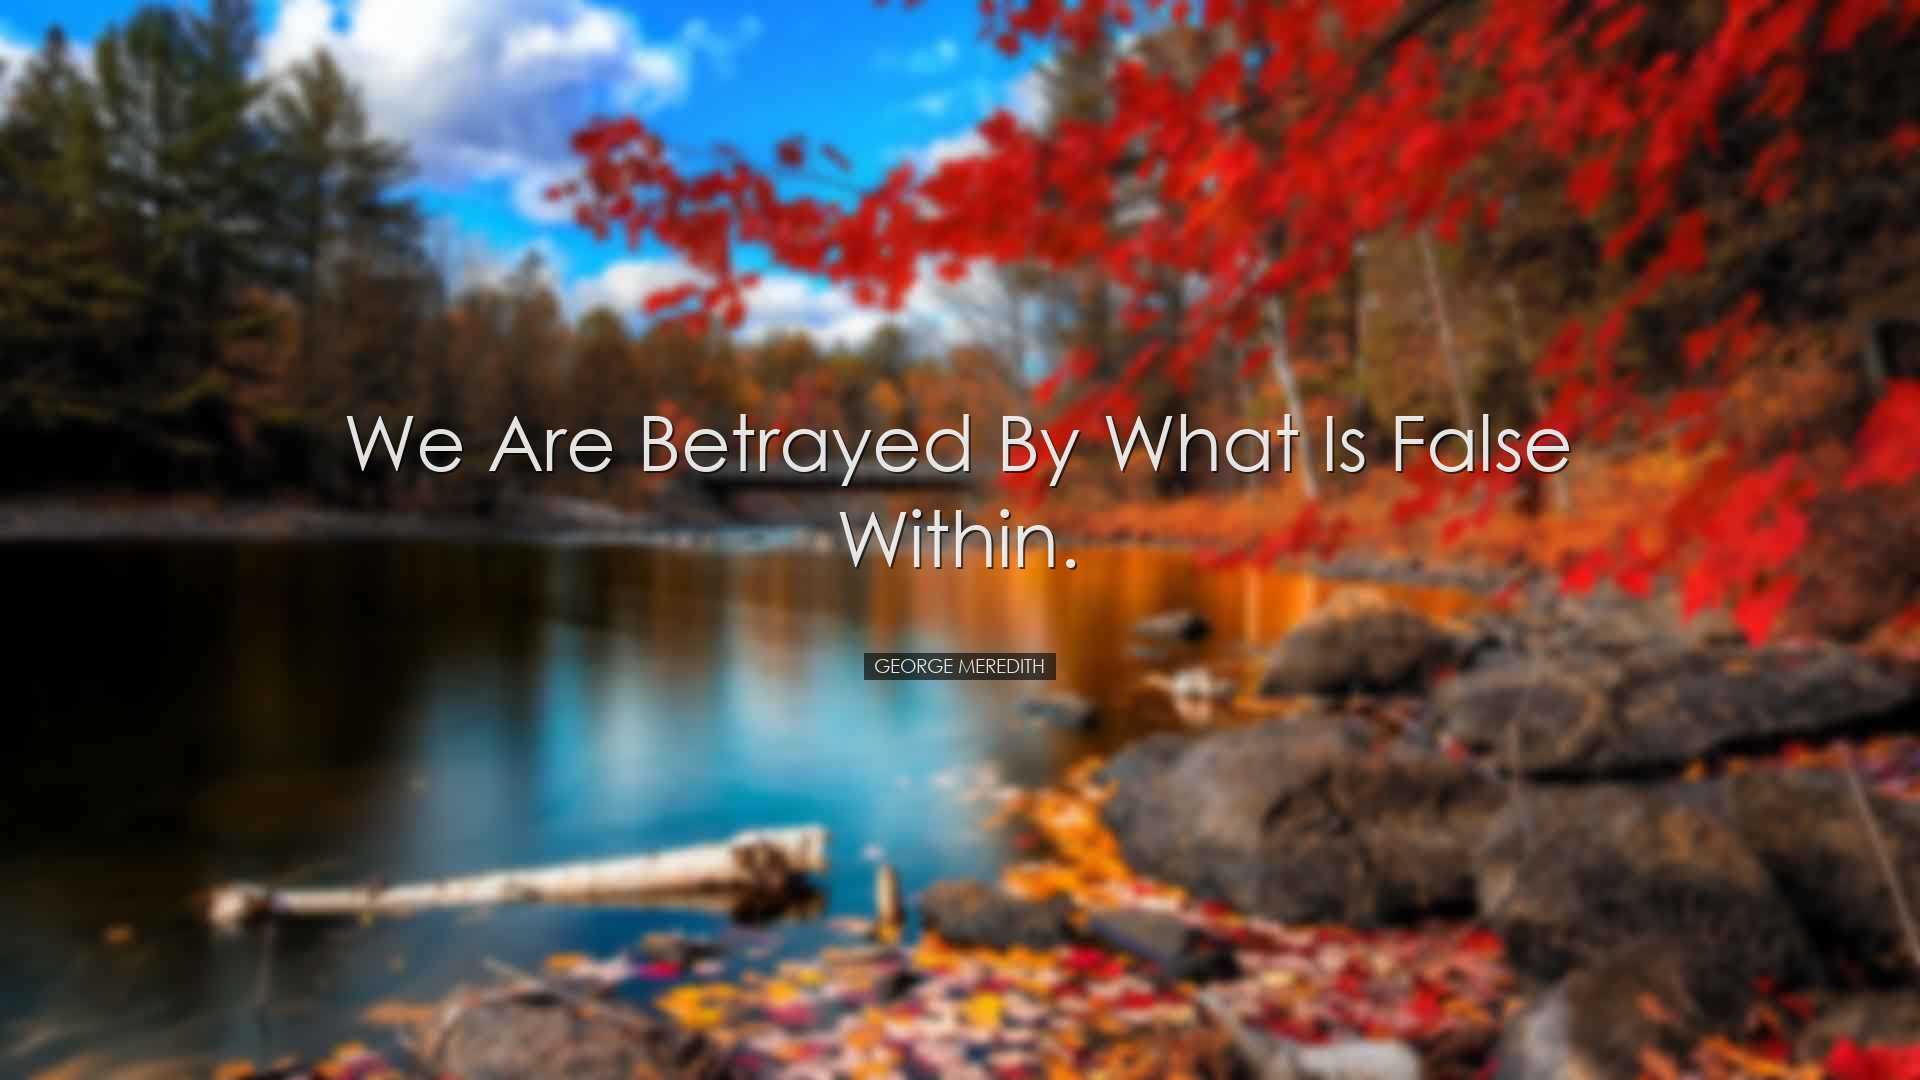 We are betrayed by what is false within. - George Meredith